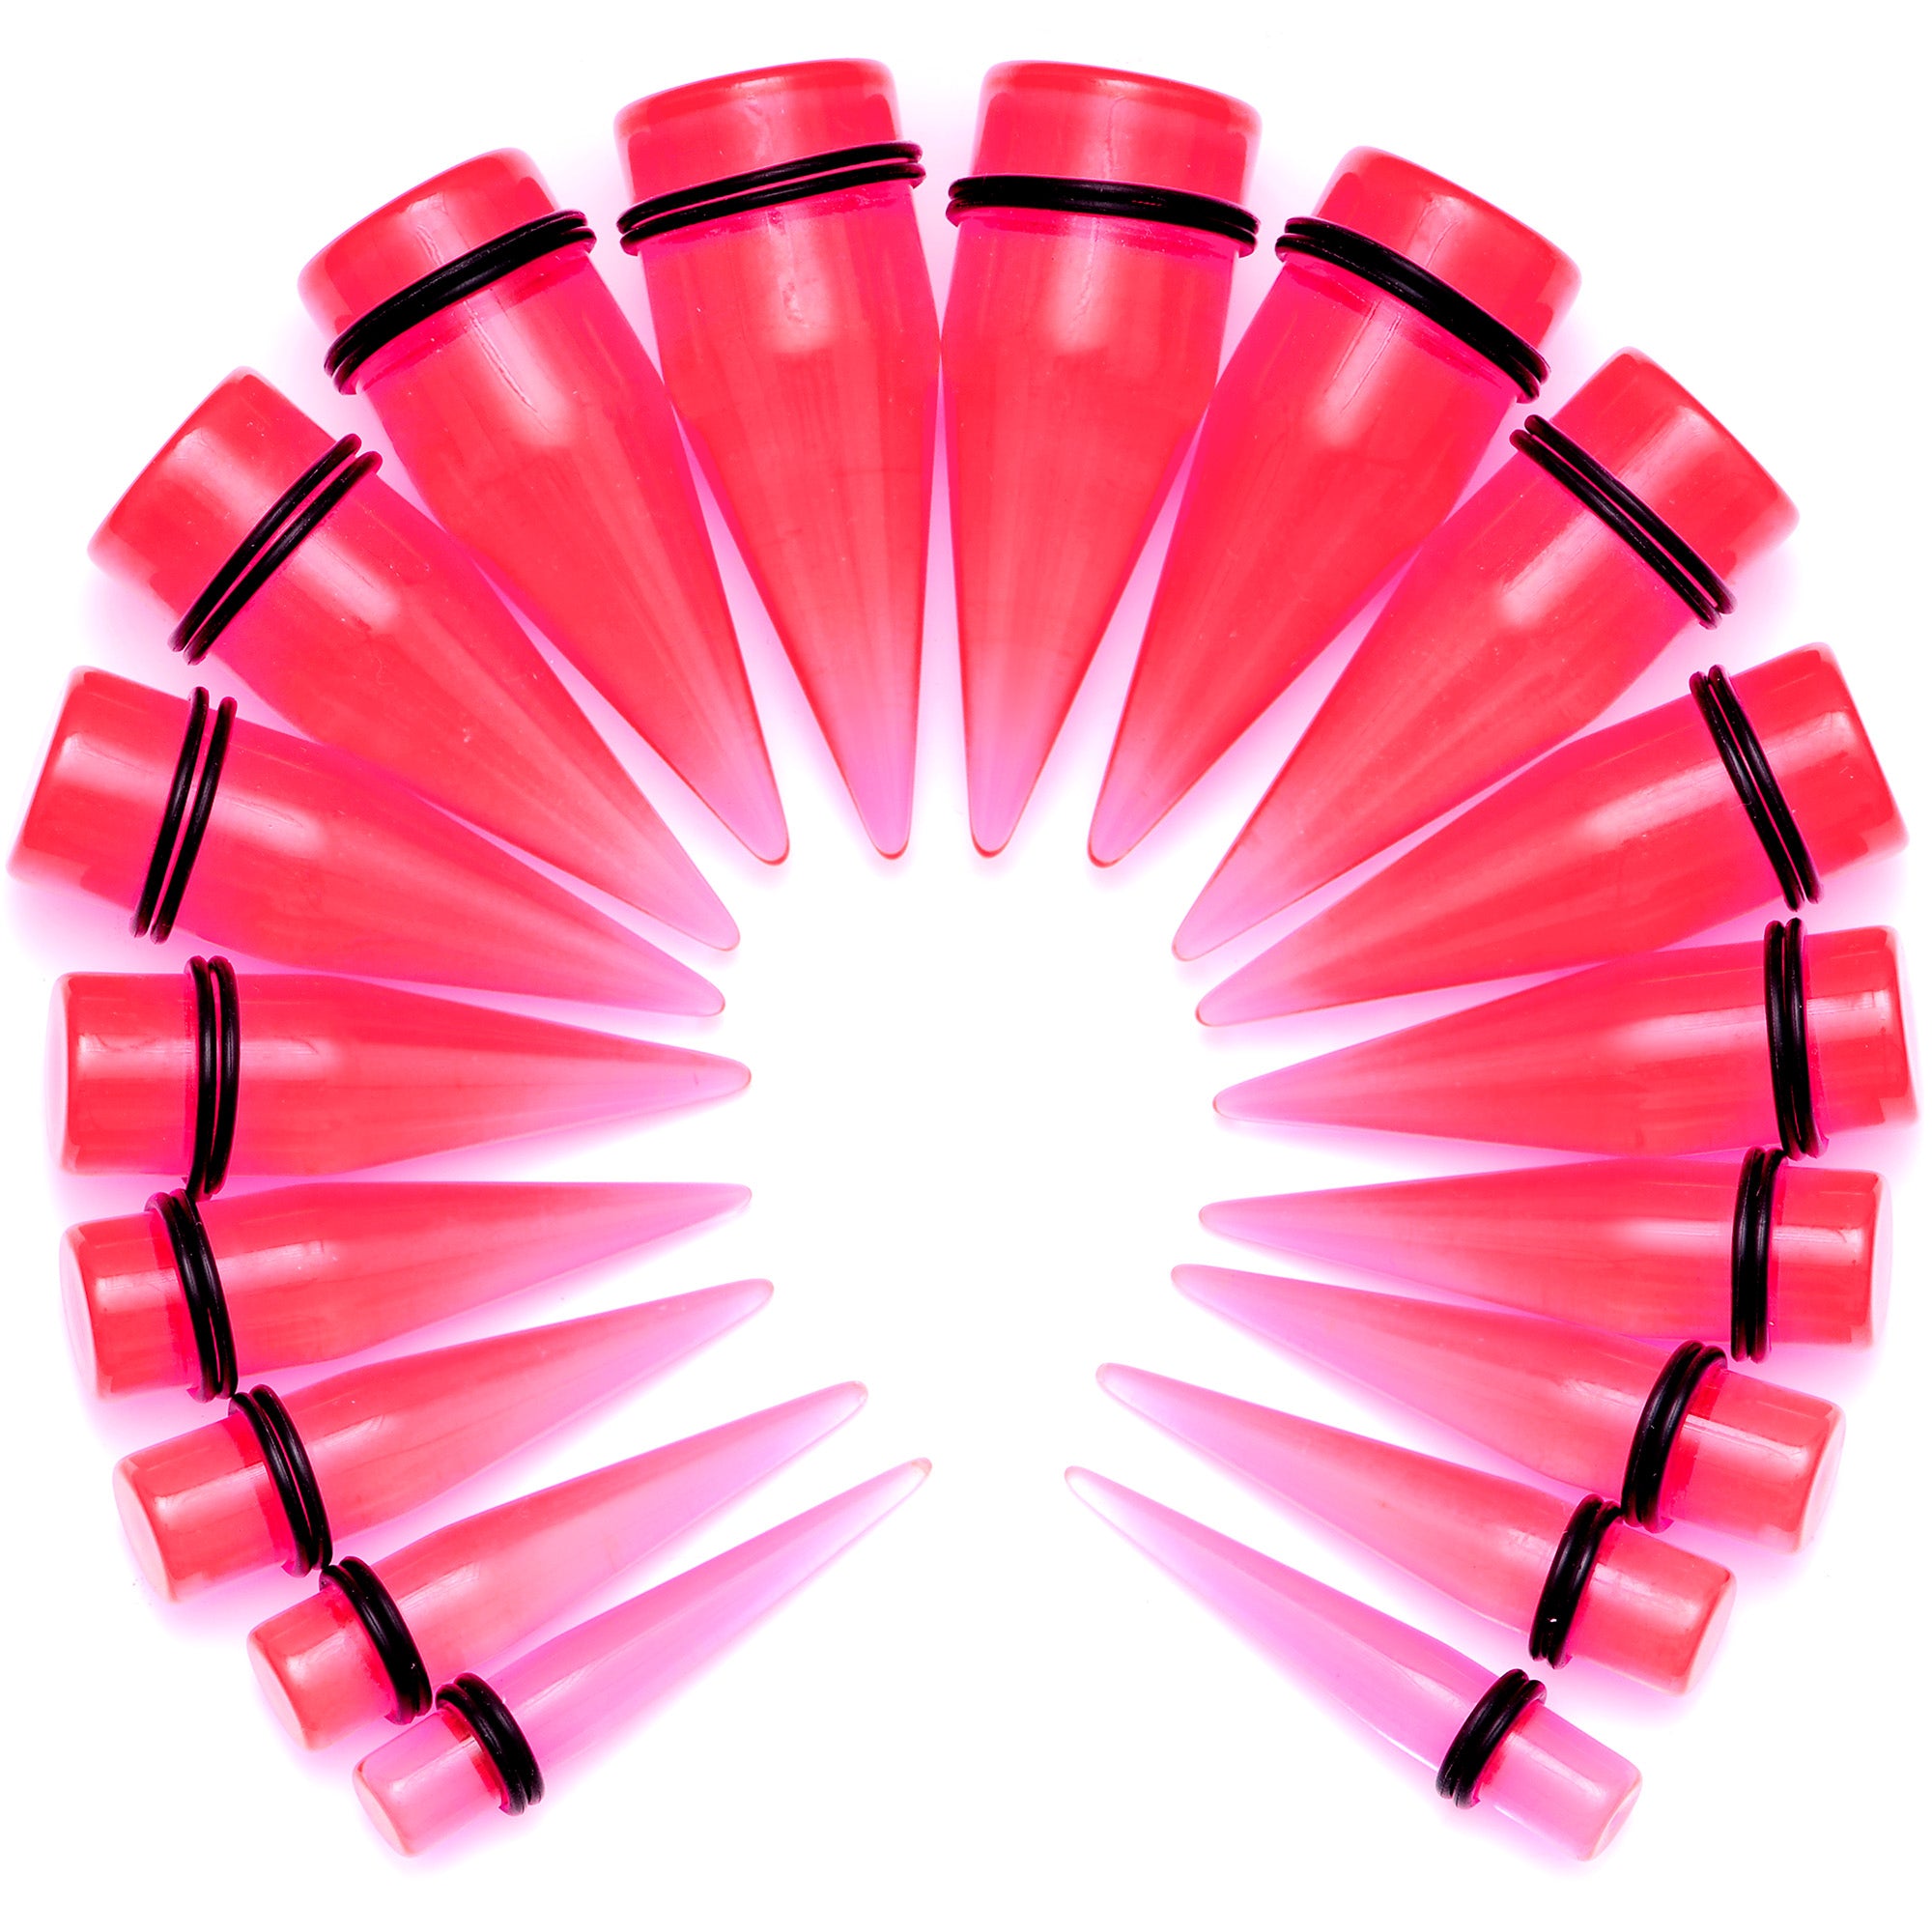 00 Gauge to 25mm Pink Acrylic Straight Taper Stretching Kit Set of 2